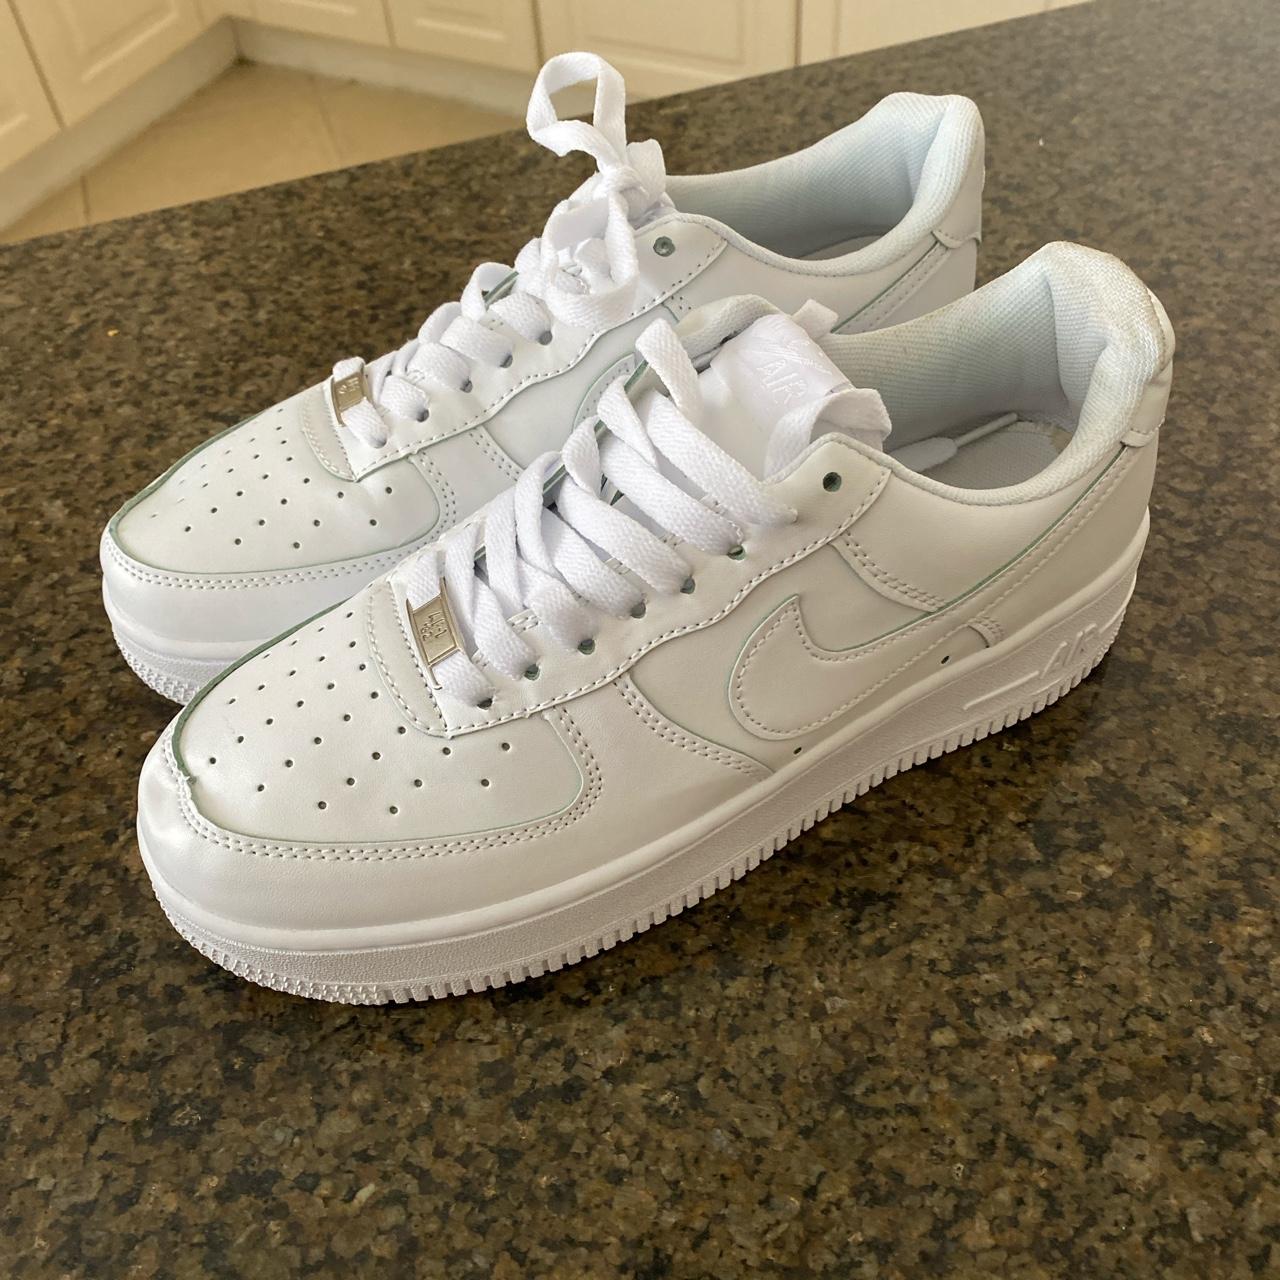 BRAND NEW WHITE AIRFORCES... size 8 1/2 Too big on me - Depop